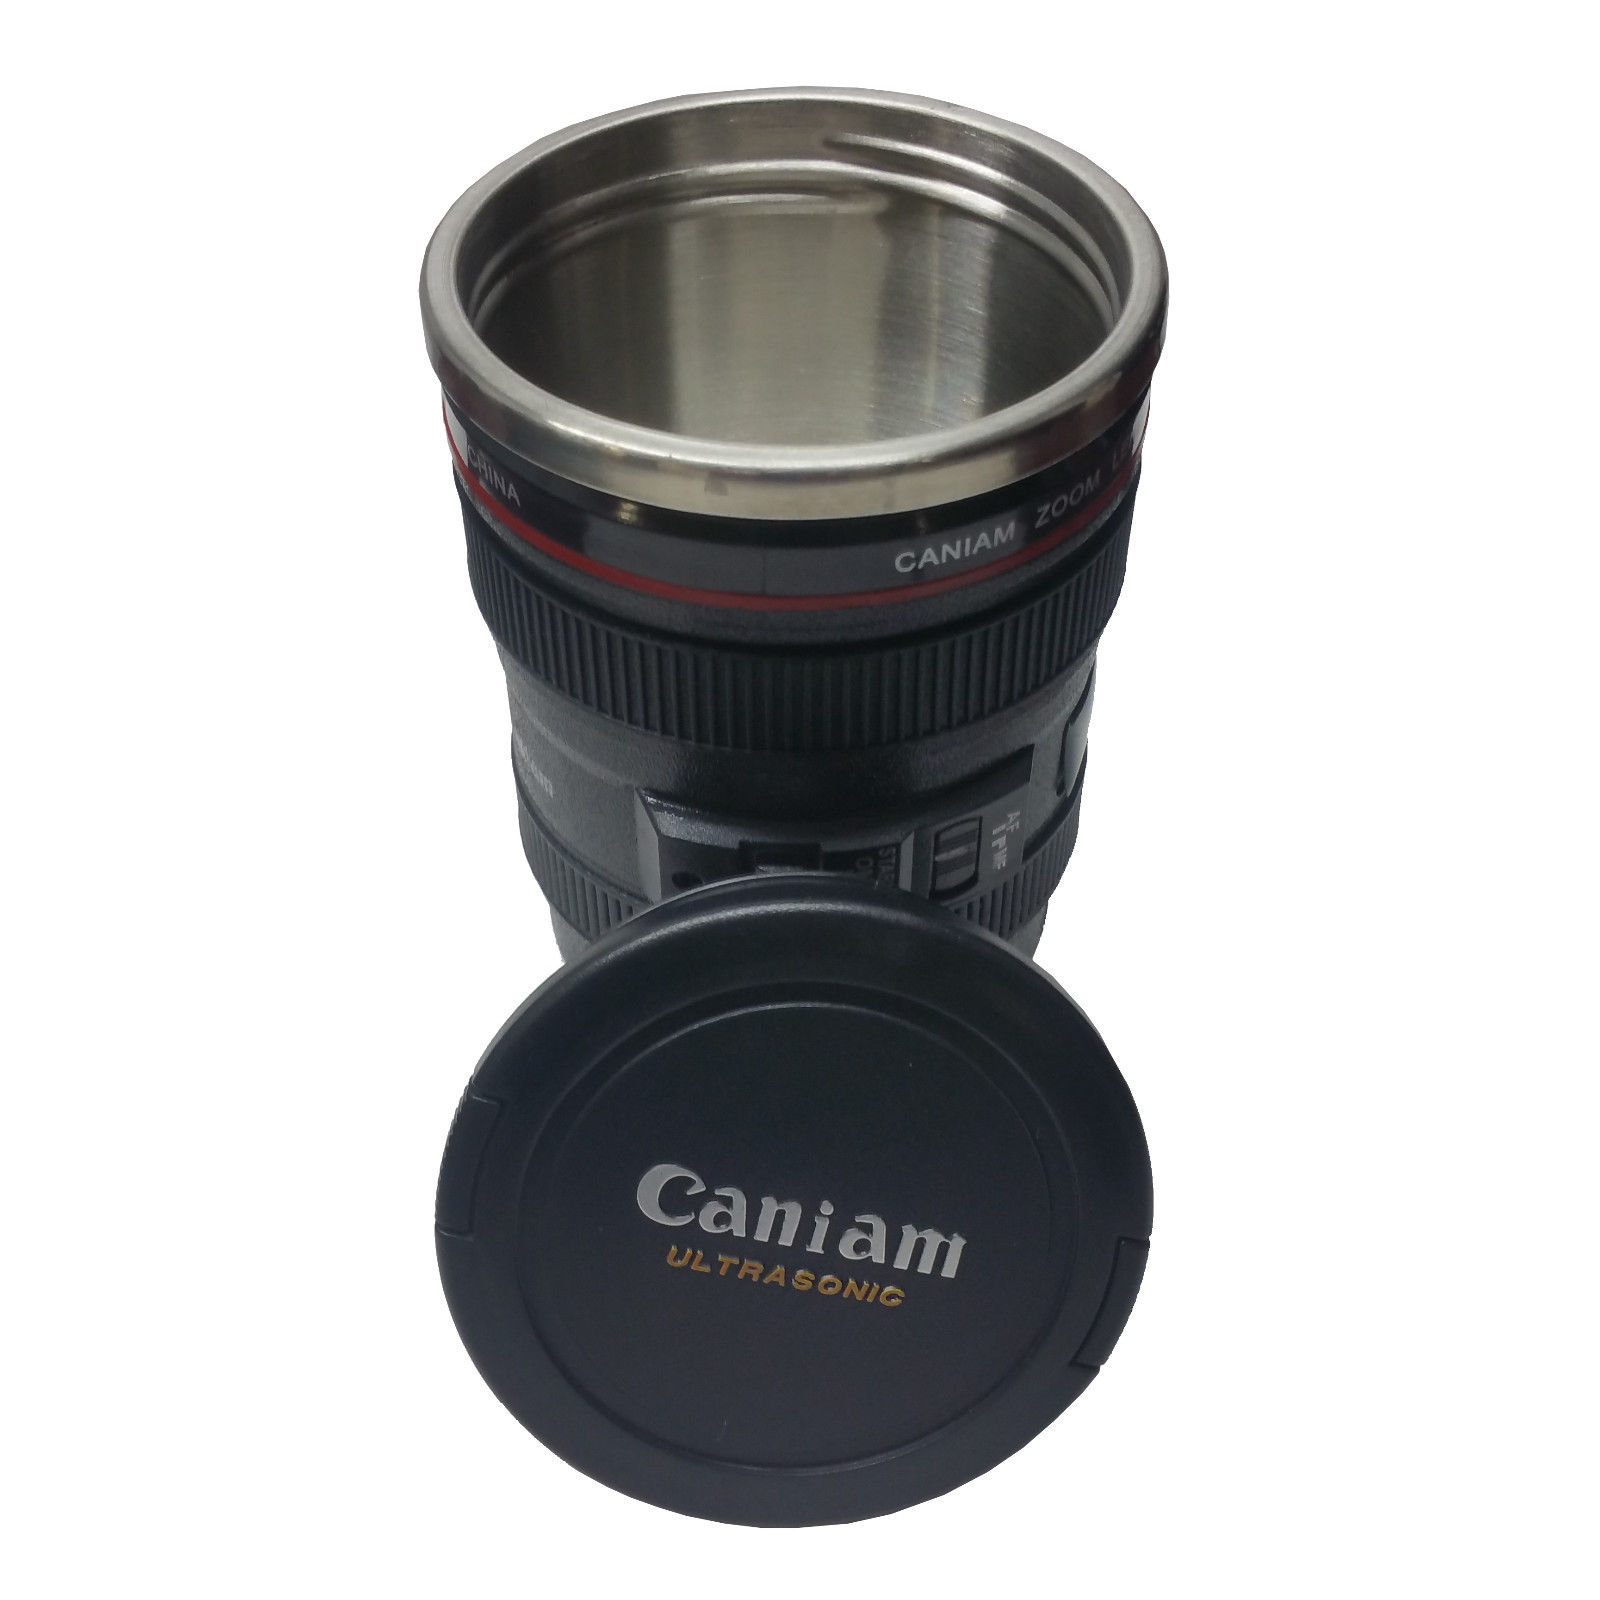 Caniam Camera Lens Thermos As Canon EF 24-105mm Coffee Tea Mug Travel Cup Gift 